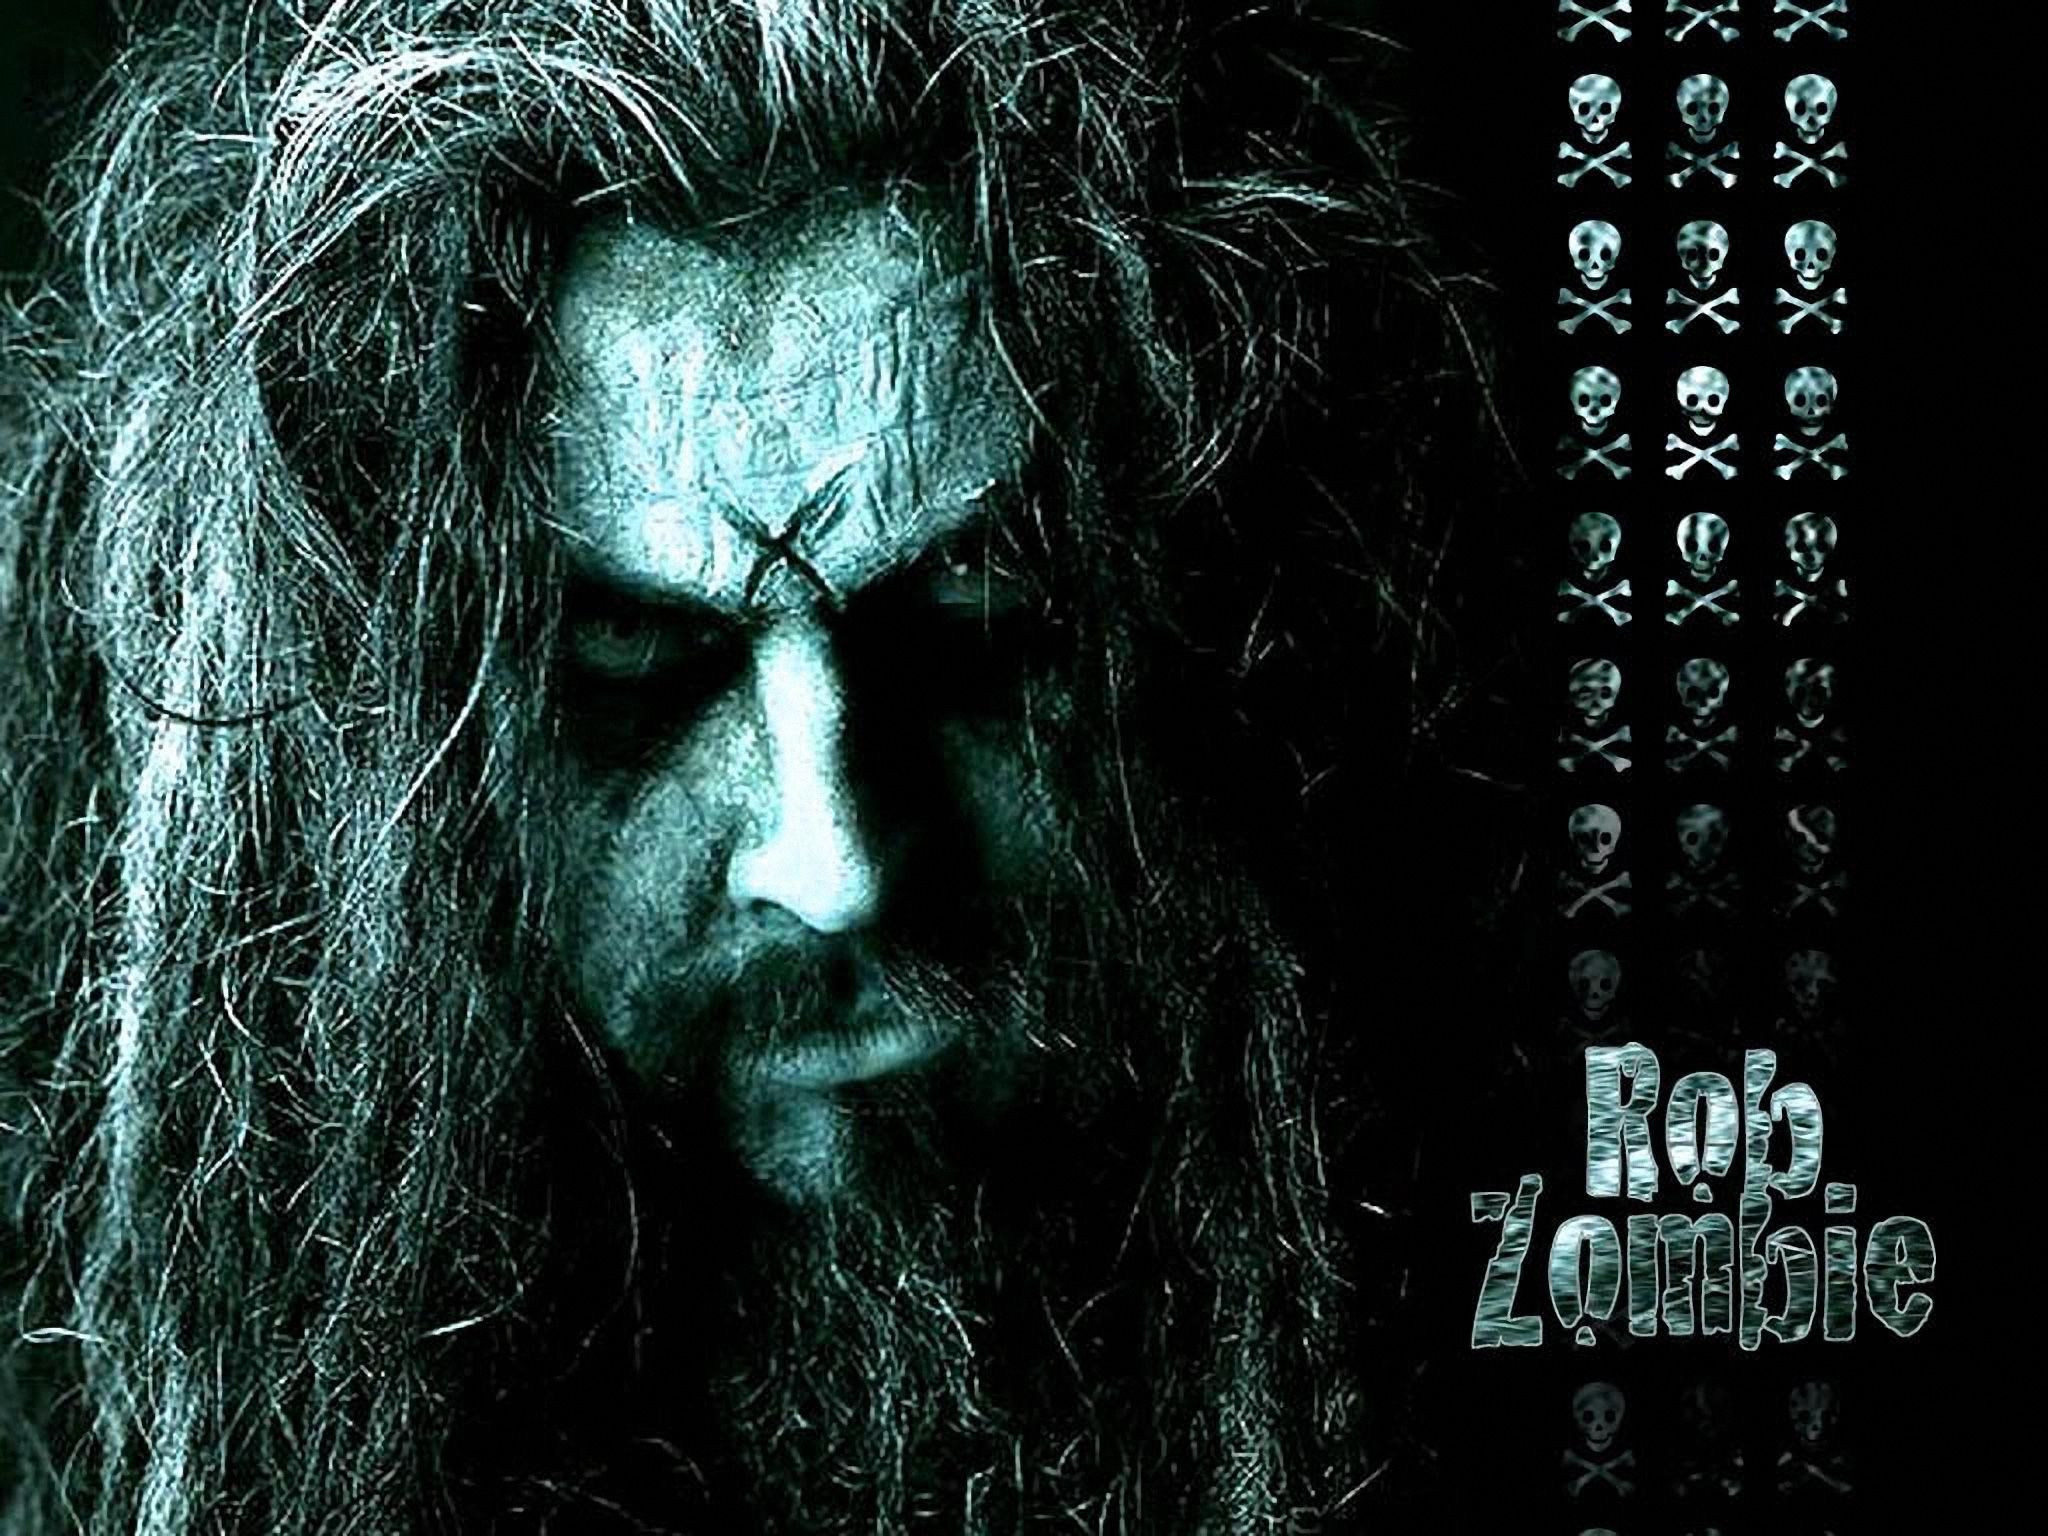 8 Rob Zombie HD Wallpapers Backgrounds - Wallpaper Abyss